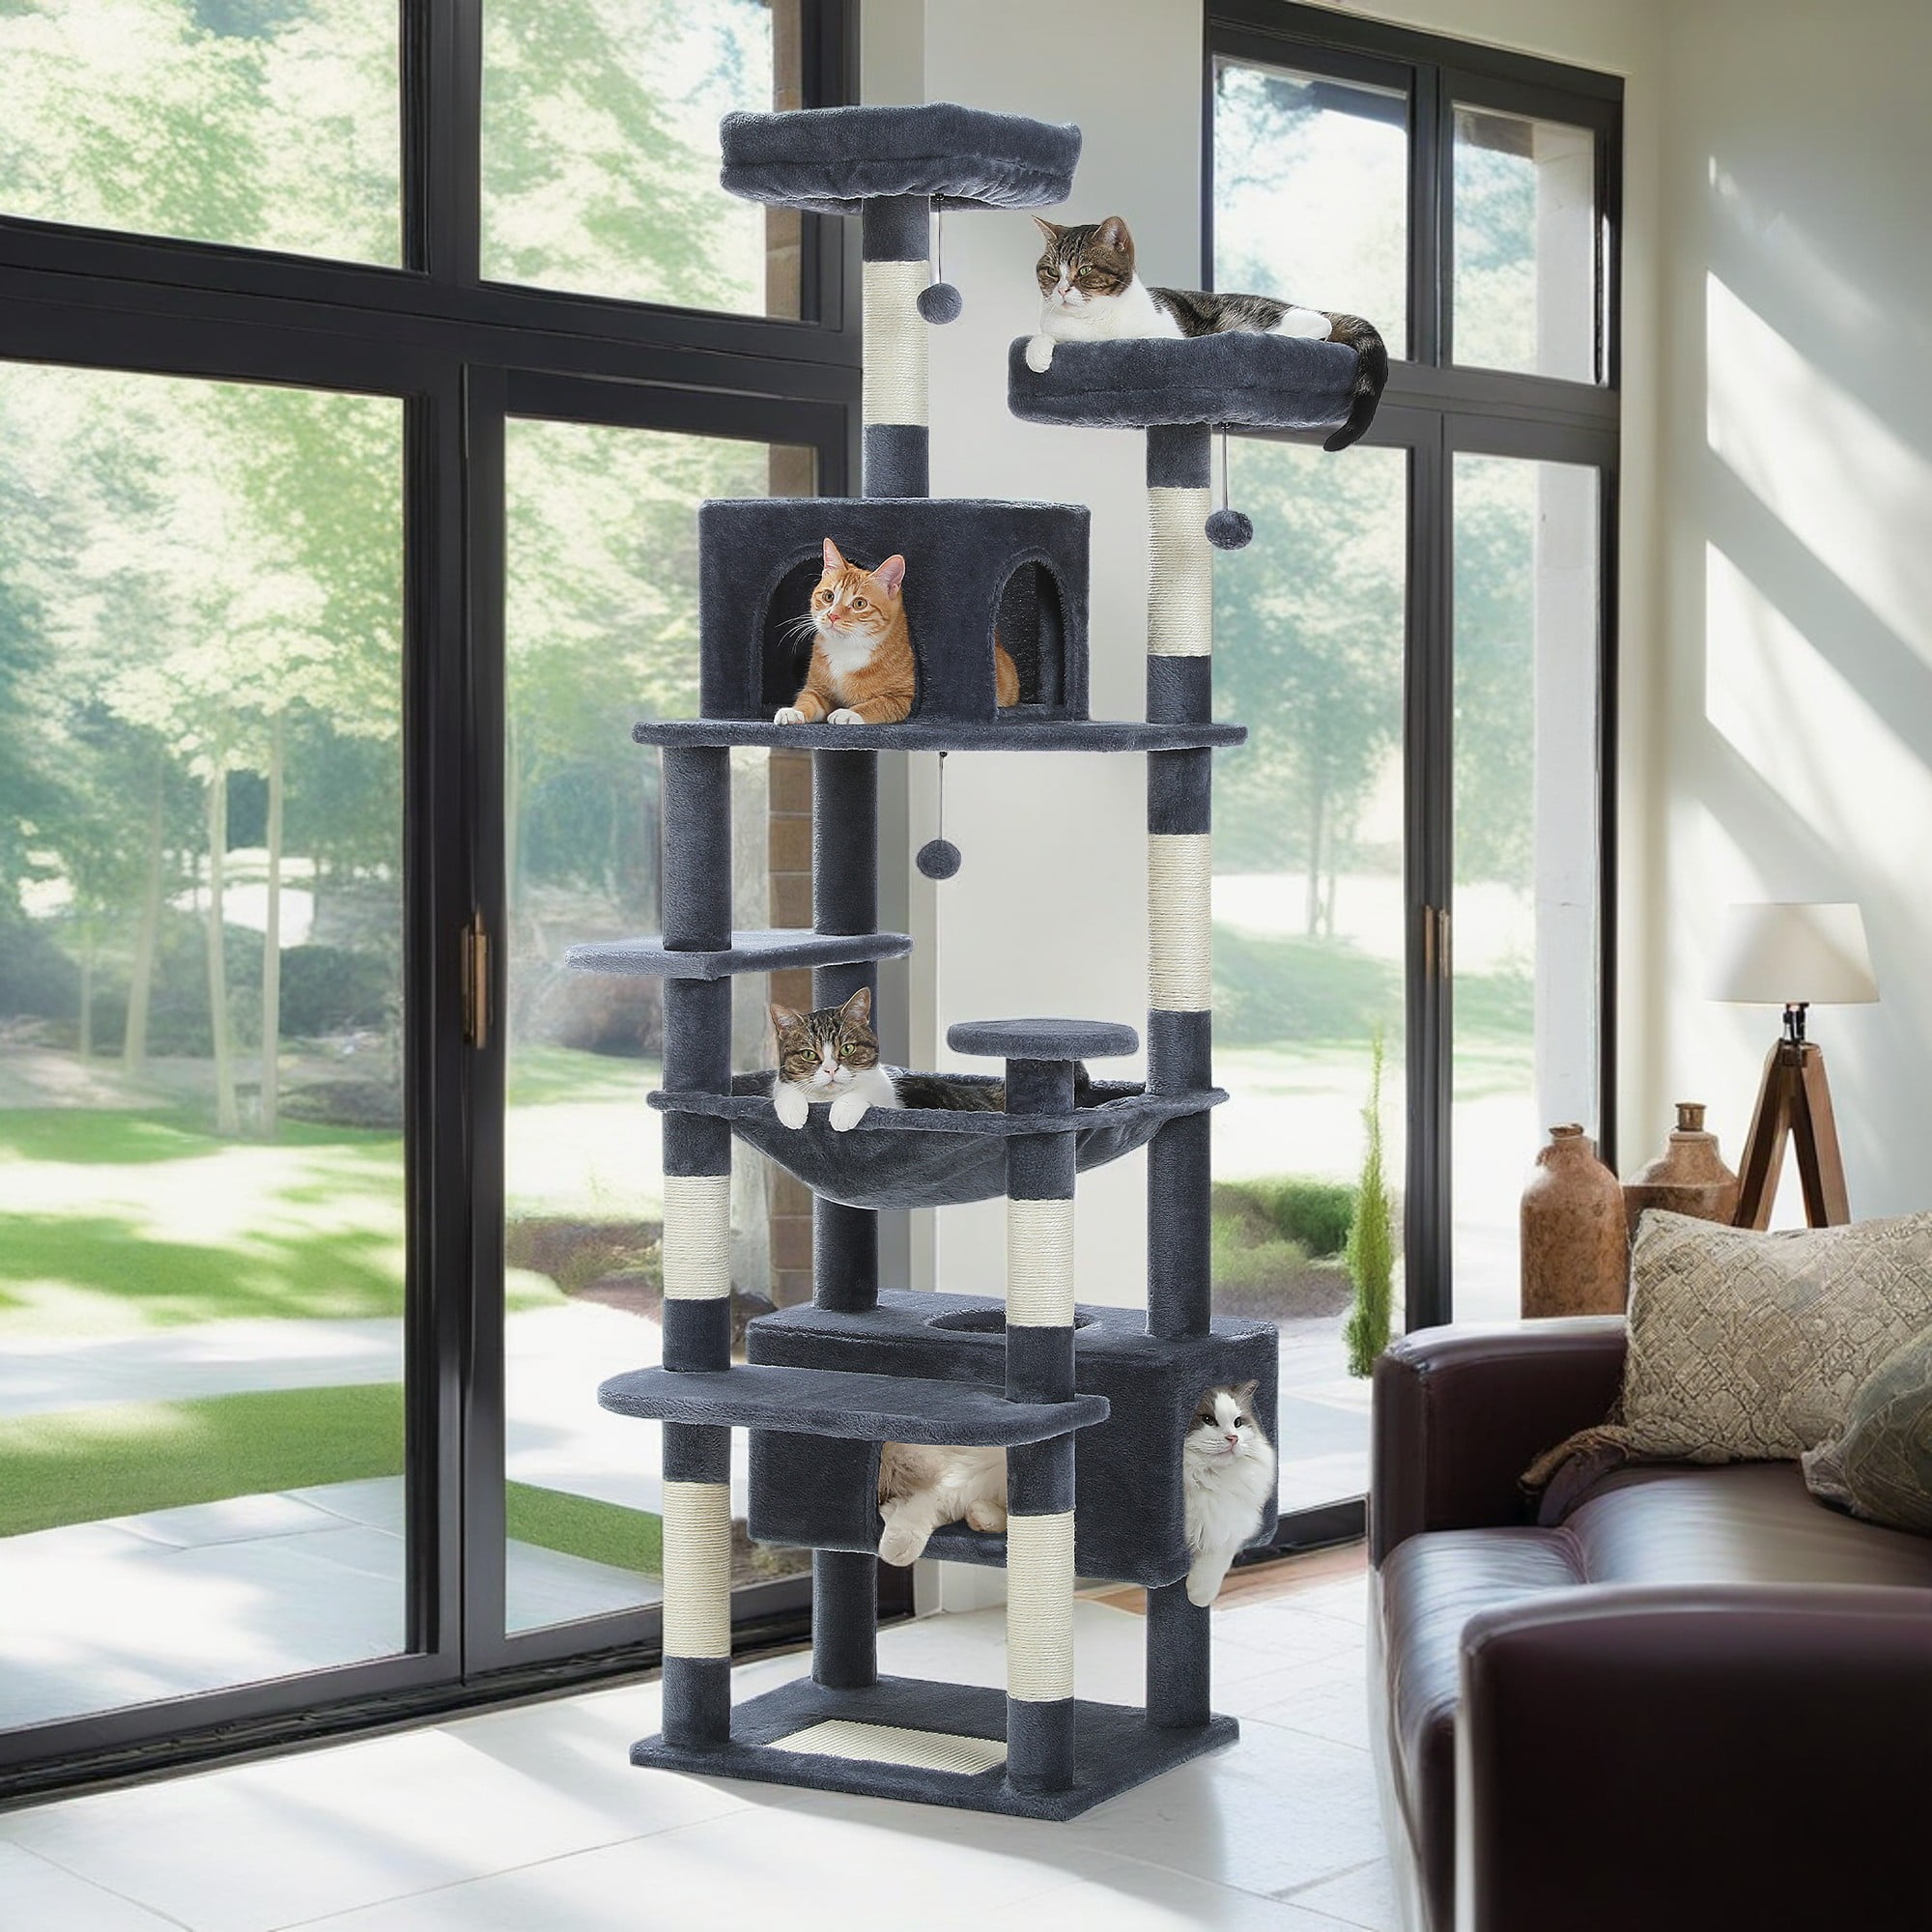 Pefilos 72" Large Cat Tree Tower with Sisal Scratching Post, Indoor Cat Condo for Big Cat Maine Coon, Dark Gray